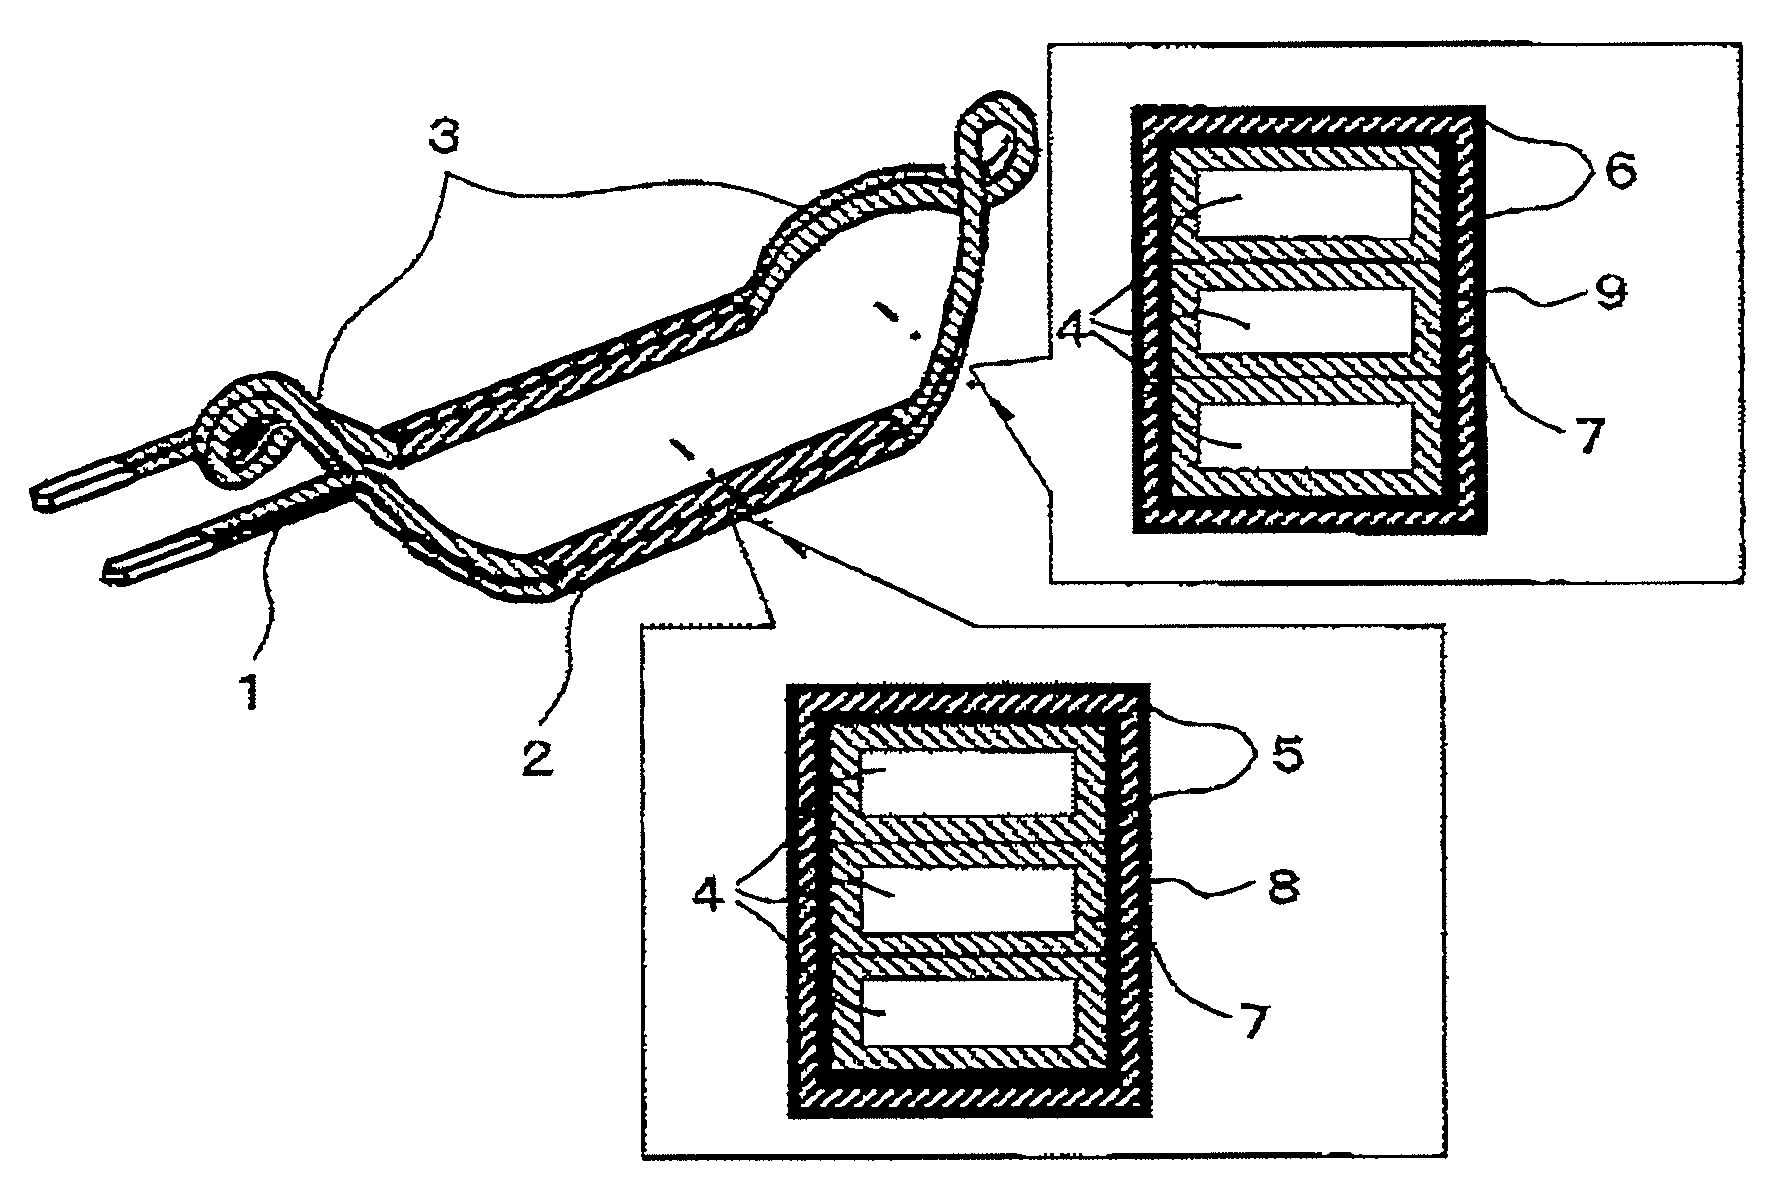 Electrical rotating machine and electric vehicle